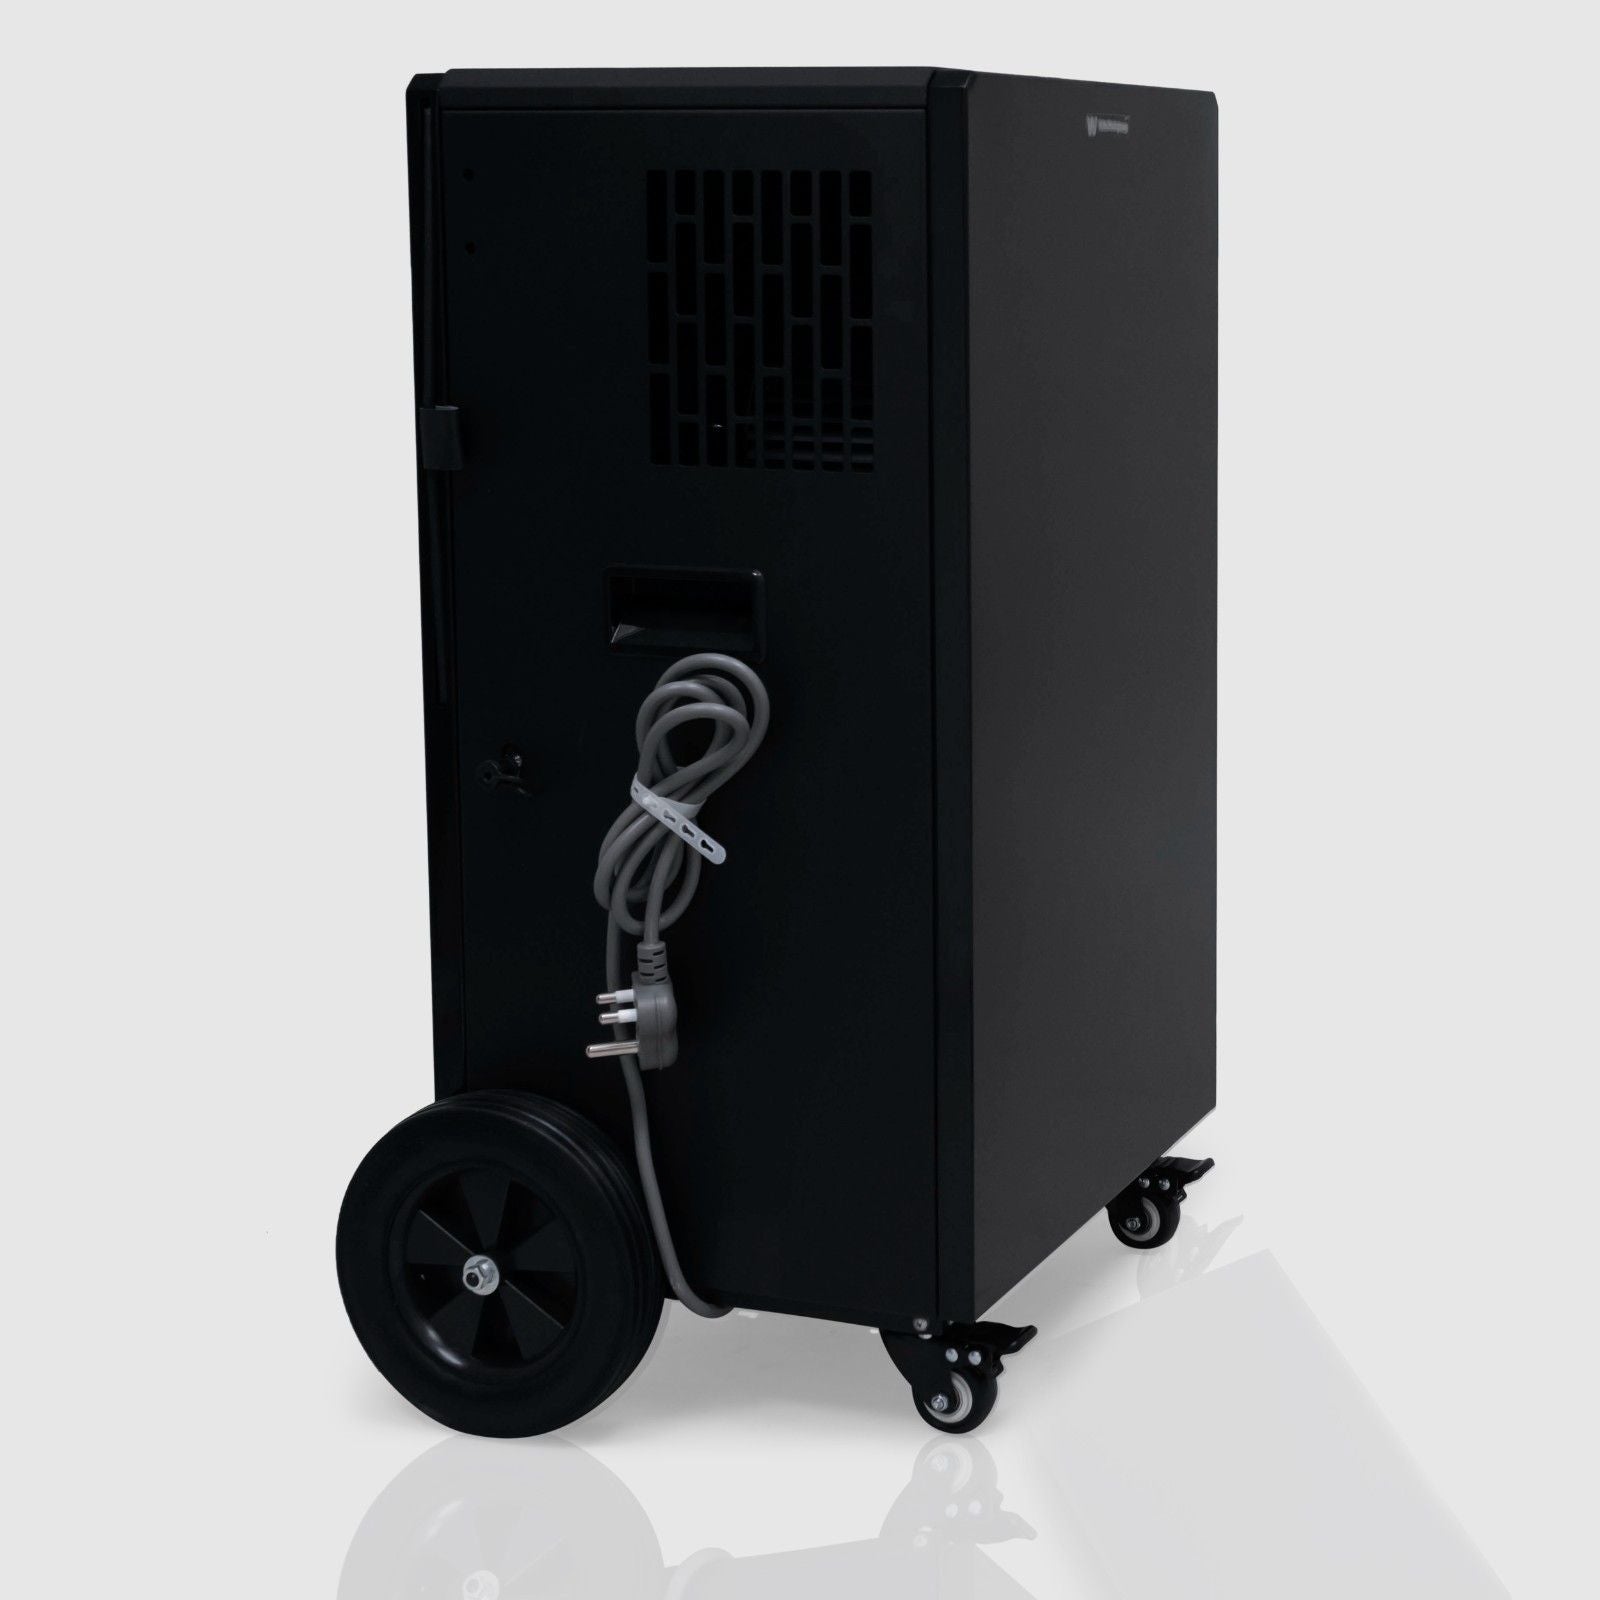 Side view of the White Westinghouse Industrial Dehumidifier WDE100, showcasing the large rear wheel, smaller front caster, and the power cord neatly wrapped on the back. The design includes a handle and vent for optimal performance, making it suitable for large commercial and industrial spaces.